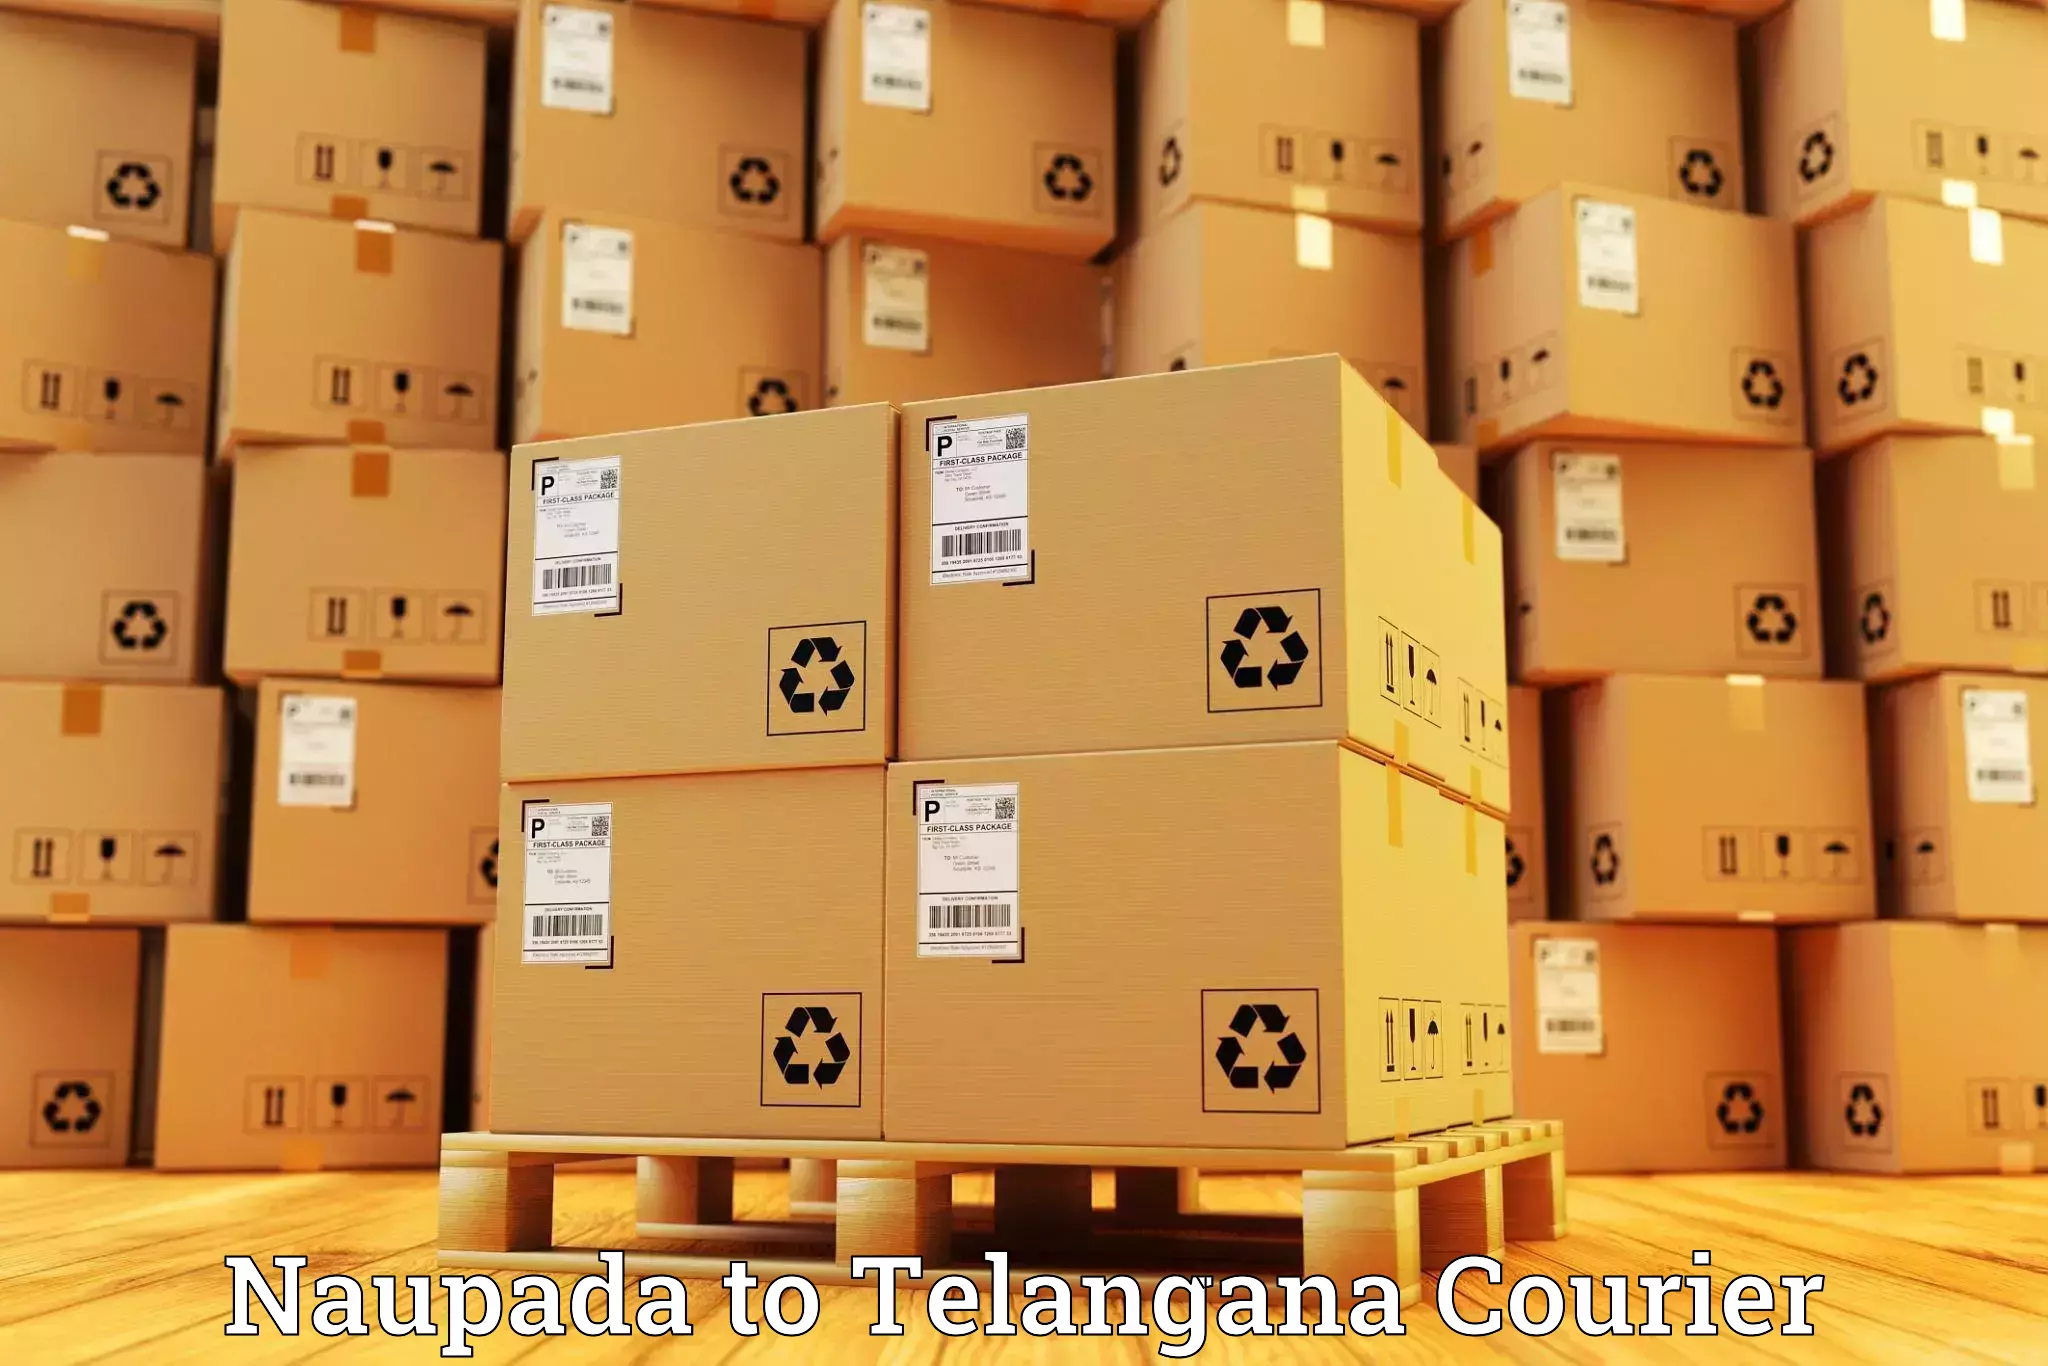 Full-service courier options in Naupada to Sultanabad